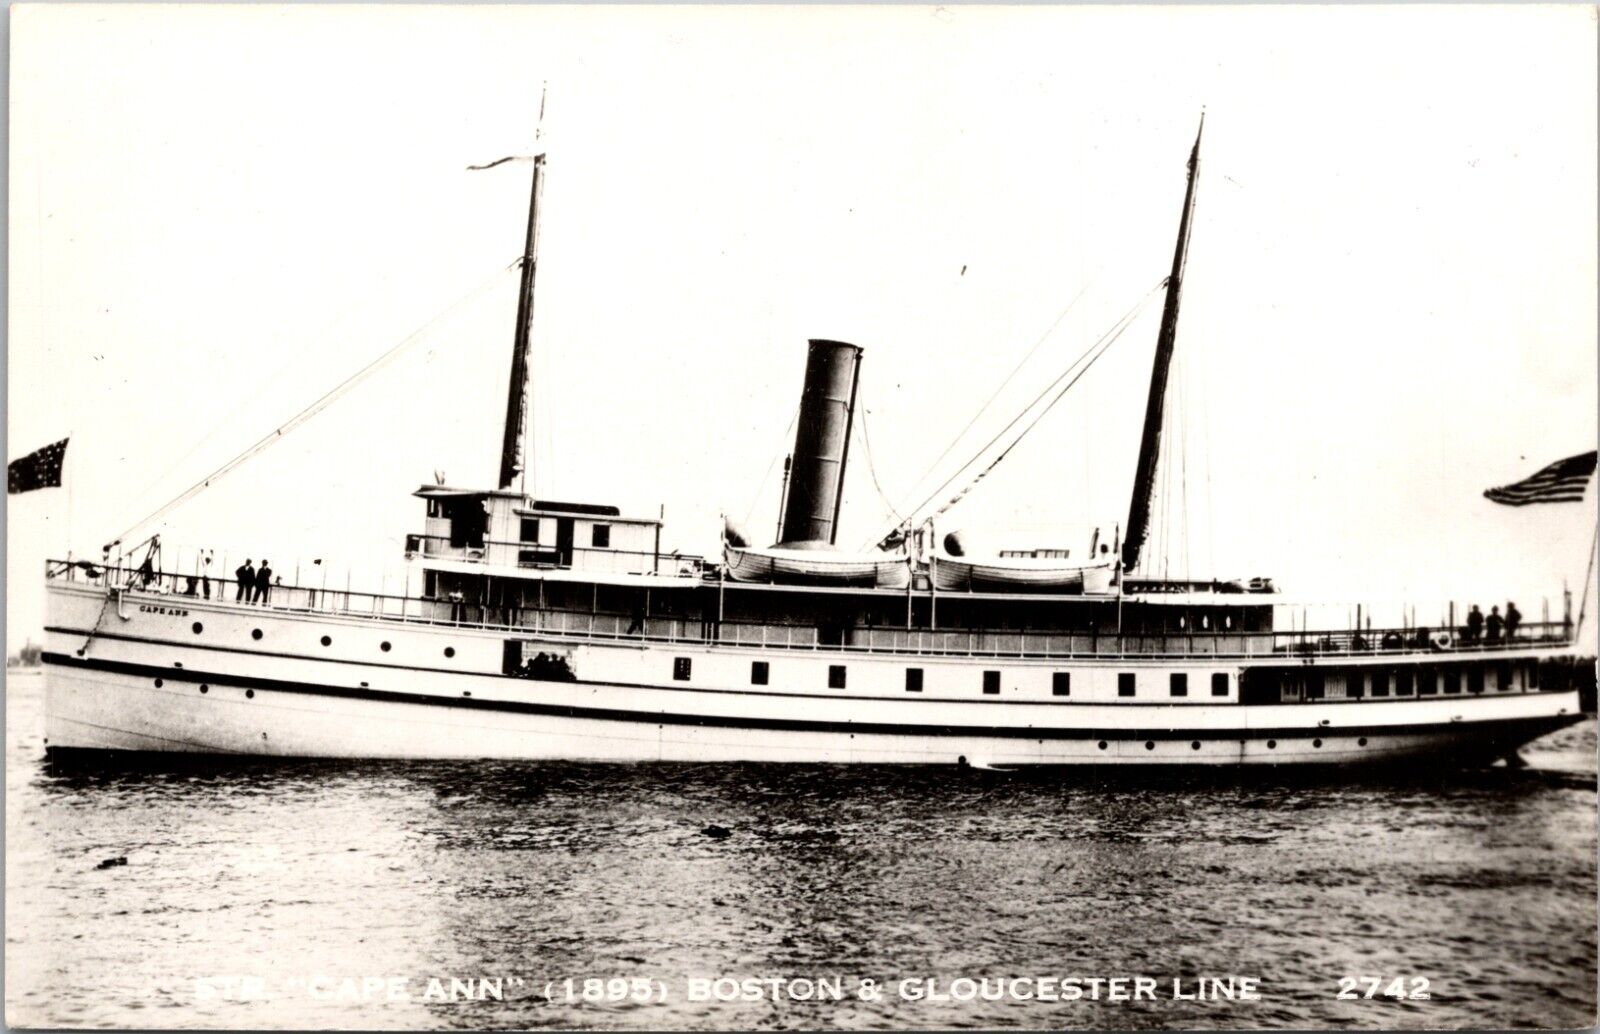 Unposted RPPC Postcard Boston and Gloucester Steamer \